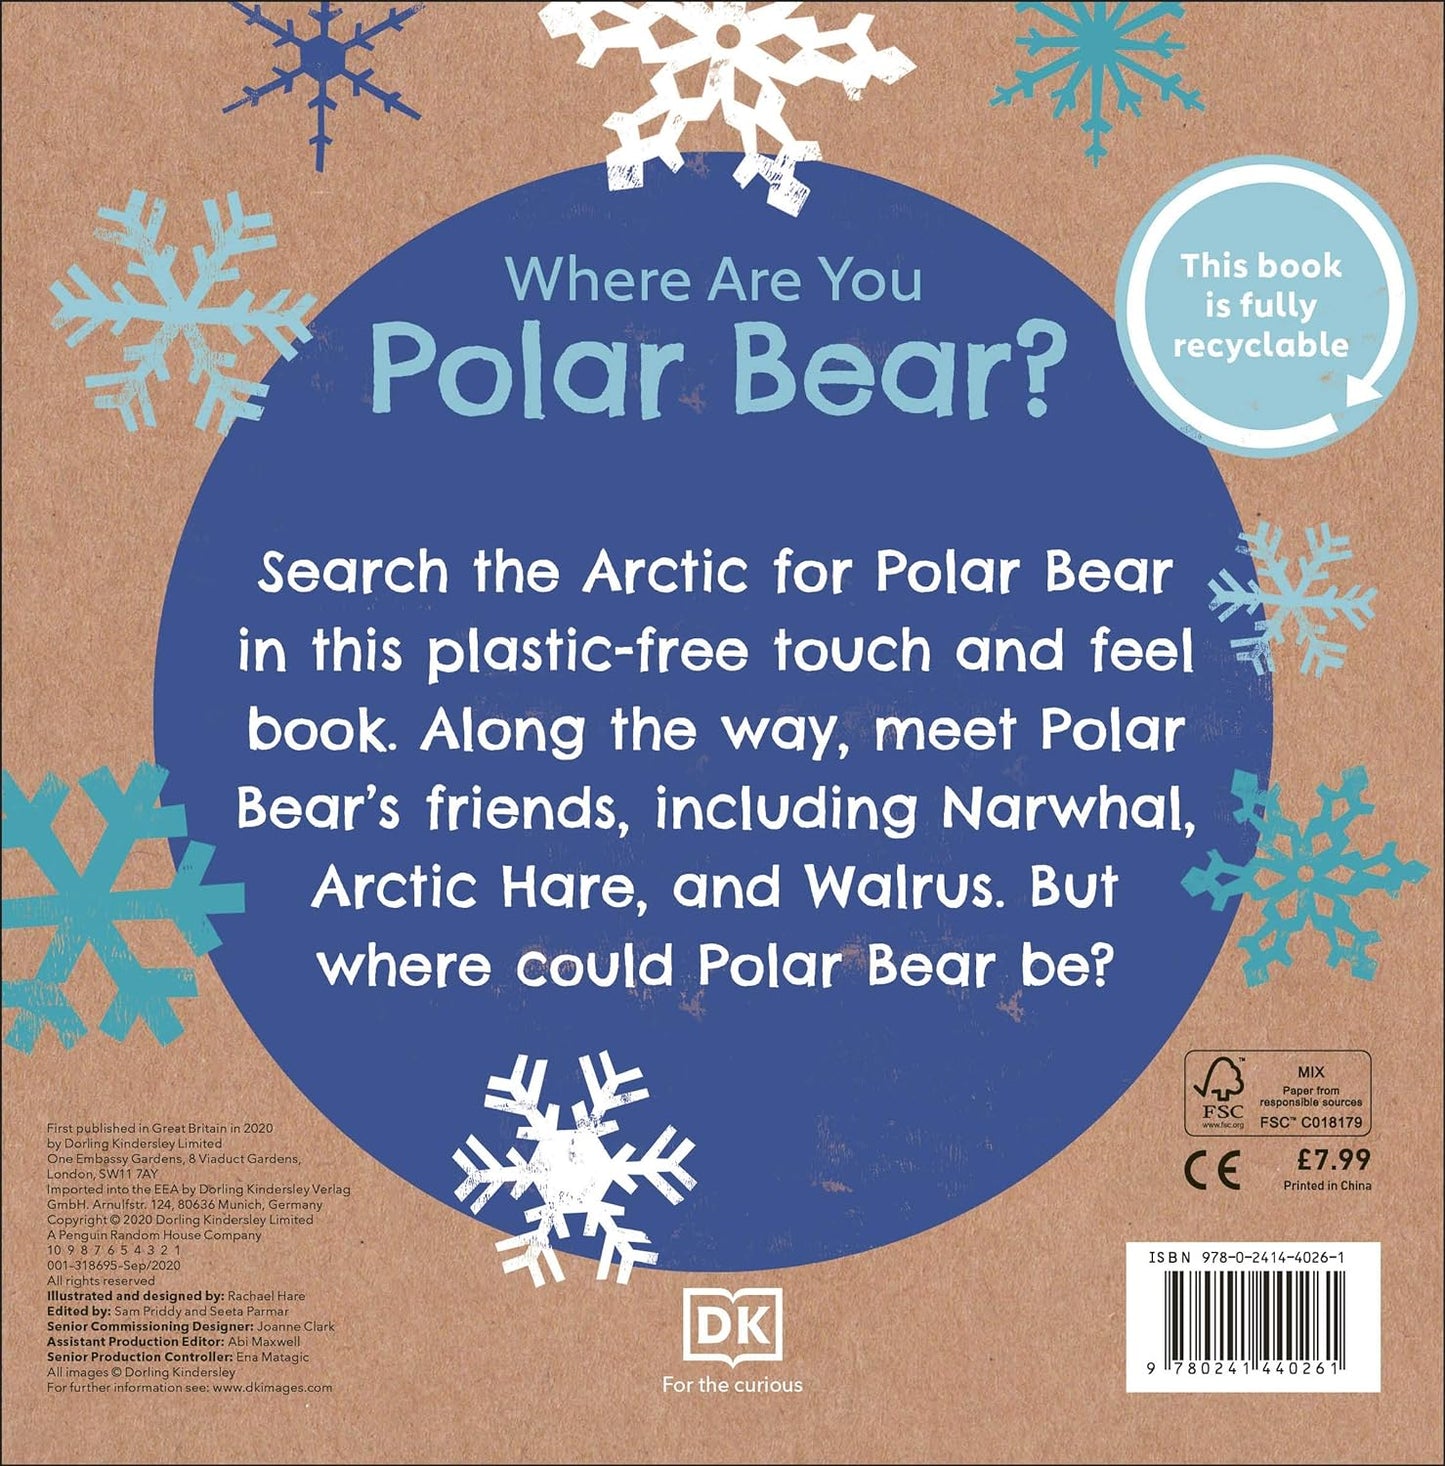 Eco Baby Where Are You Polar Bear?: A Plastic-free Touch and Feel Book